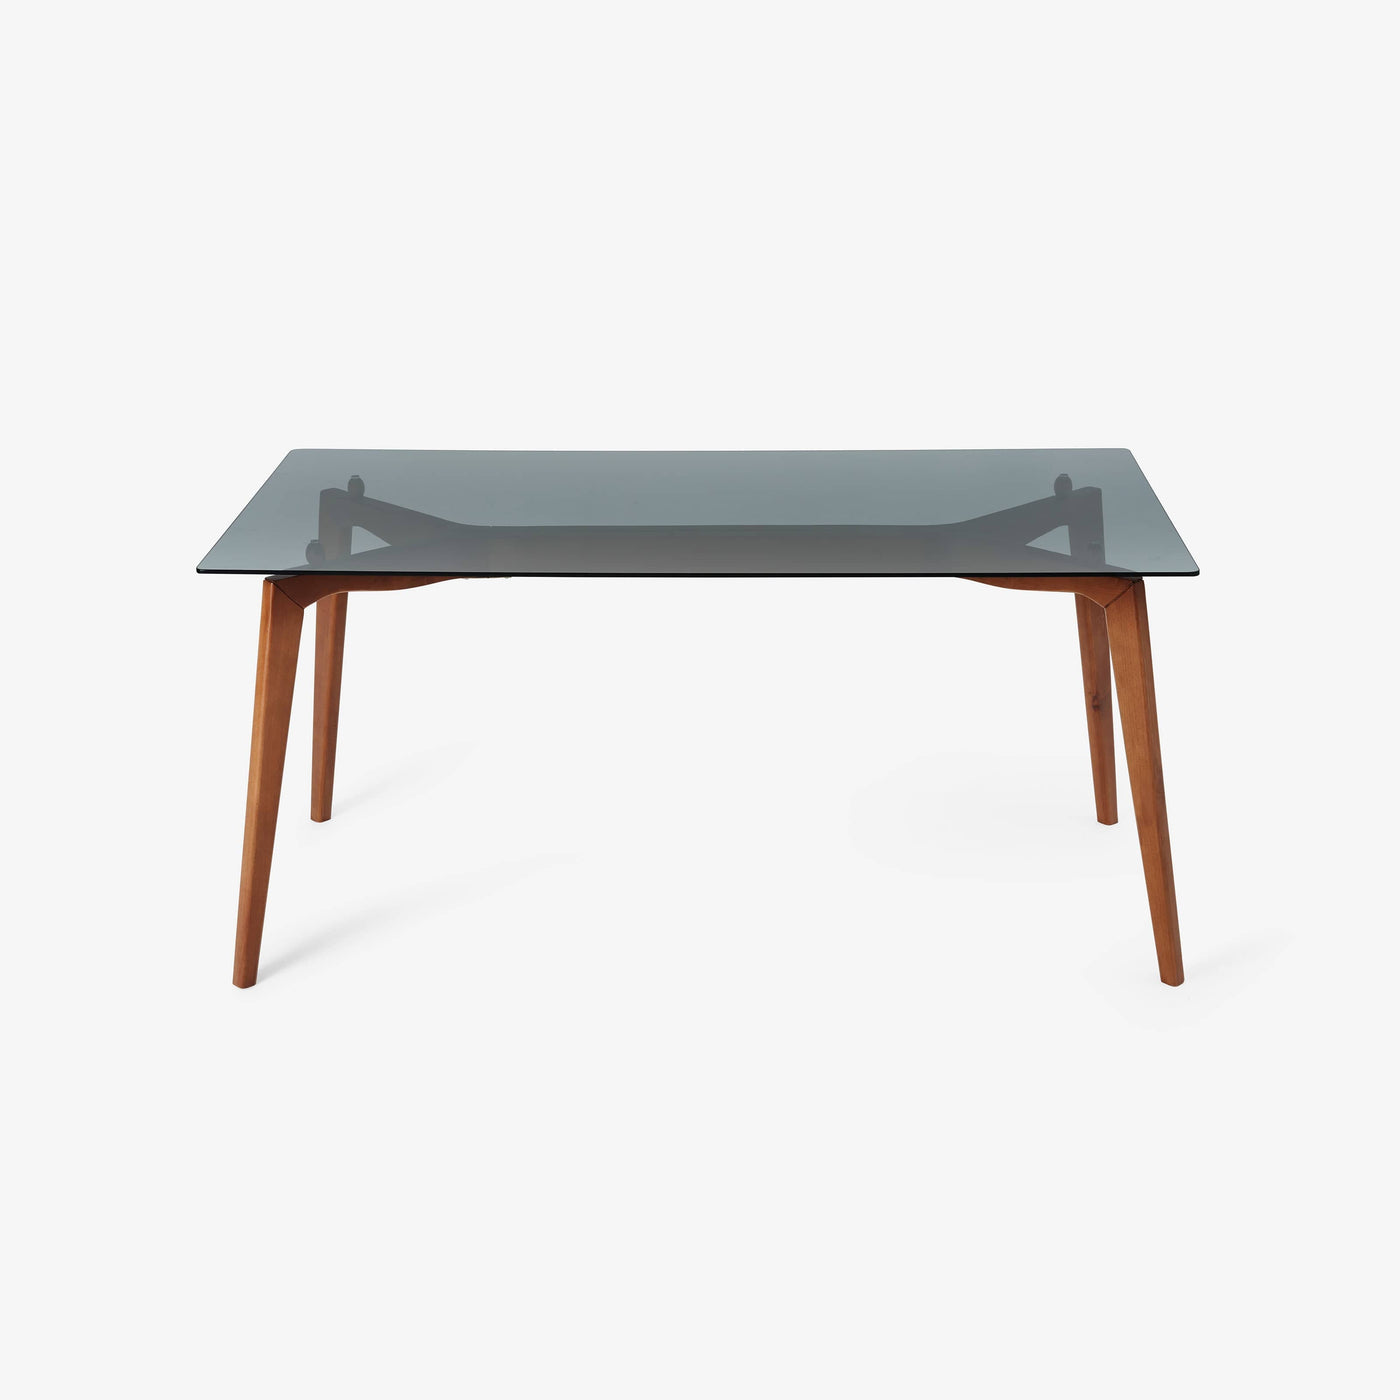 Piet Tempered Glass Dining Table, Wood Dining Tables sazy.com